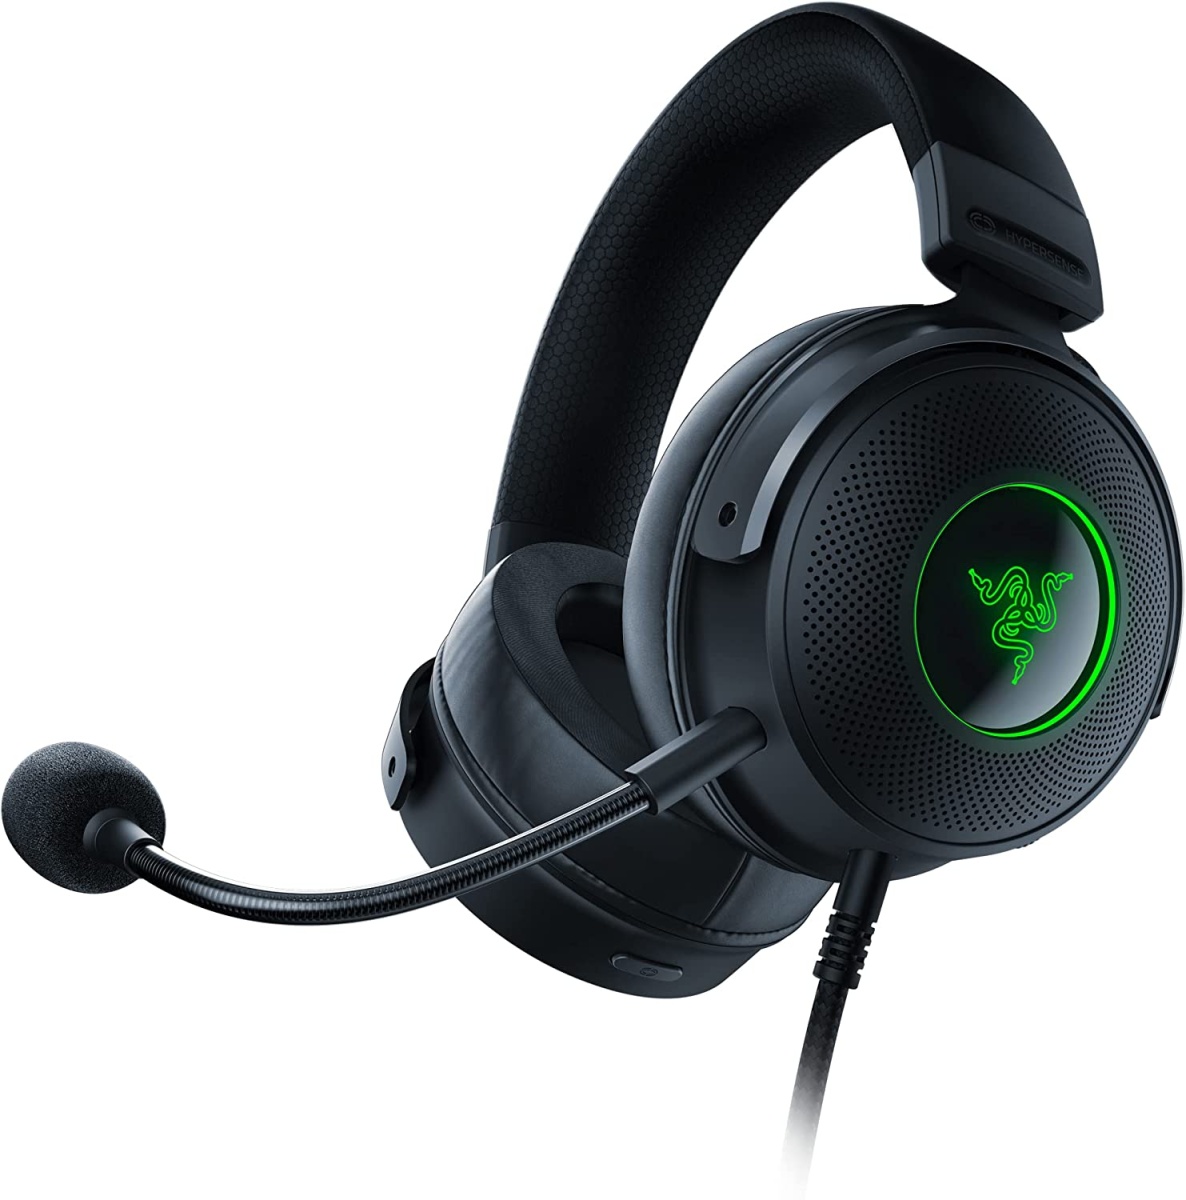 HyperX Cloud Core Wireless review: A quality gaming headset without the fuss